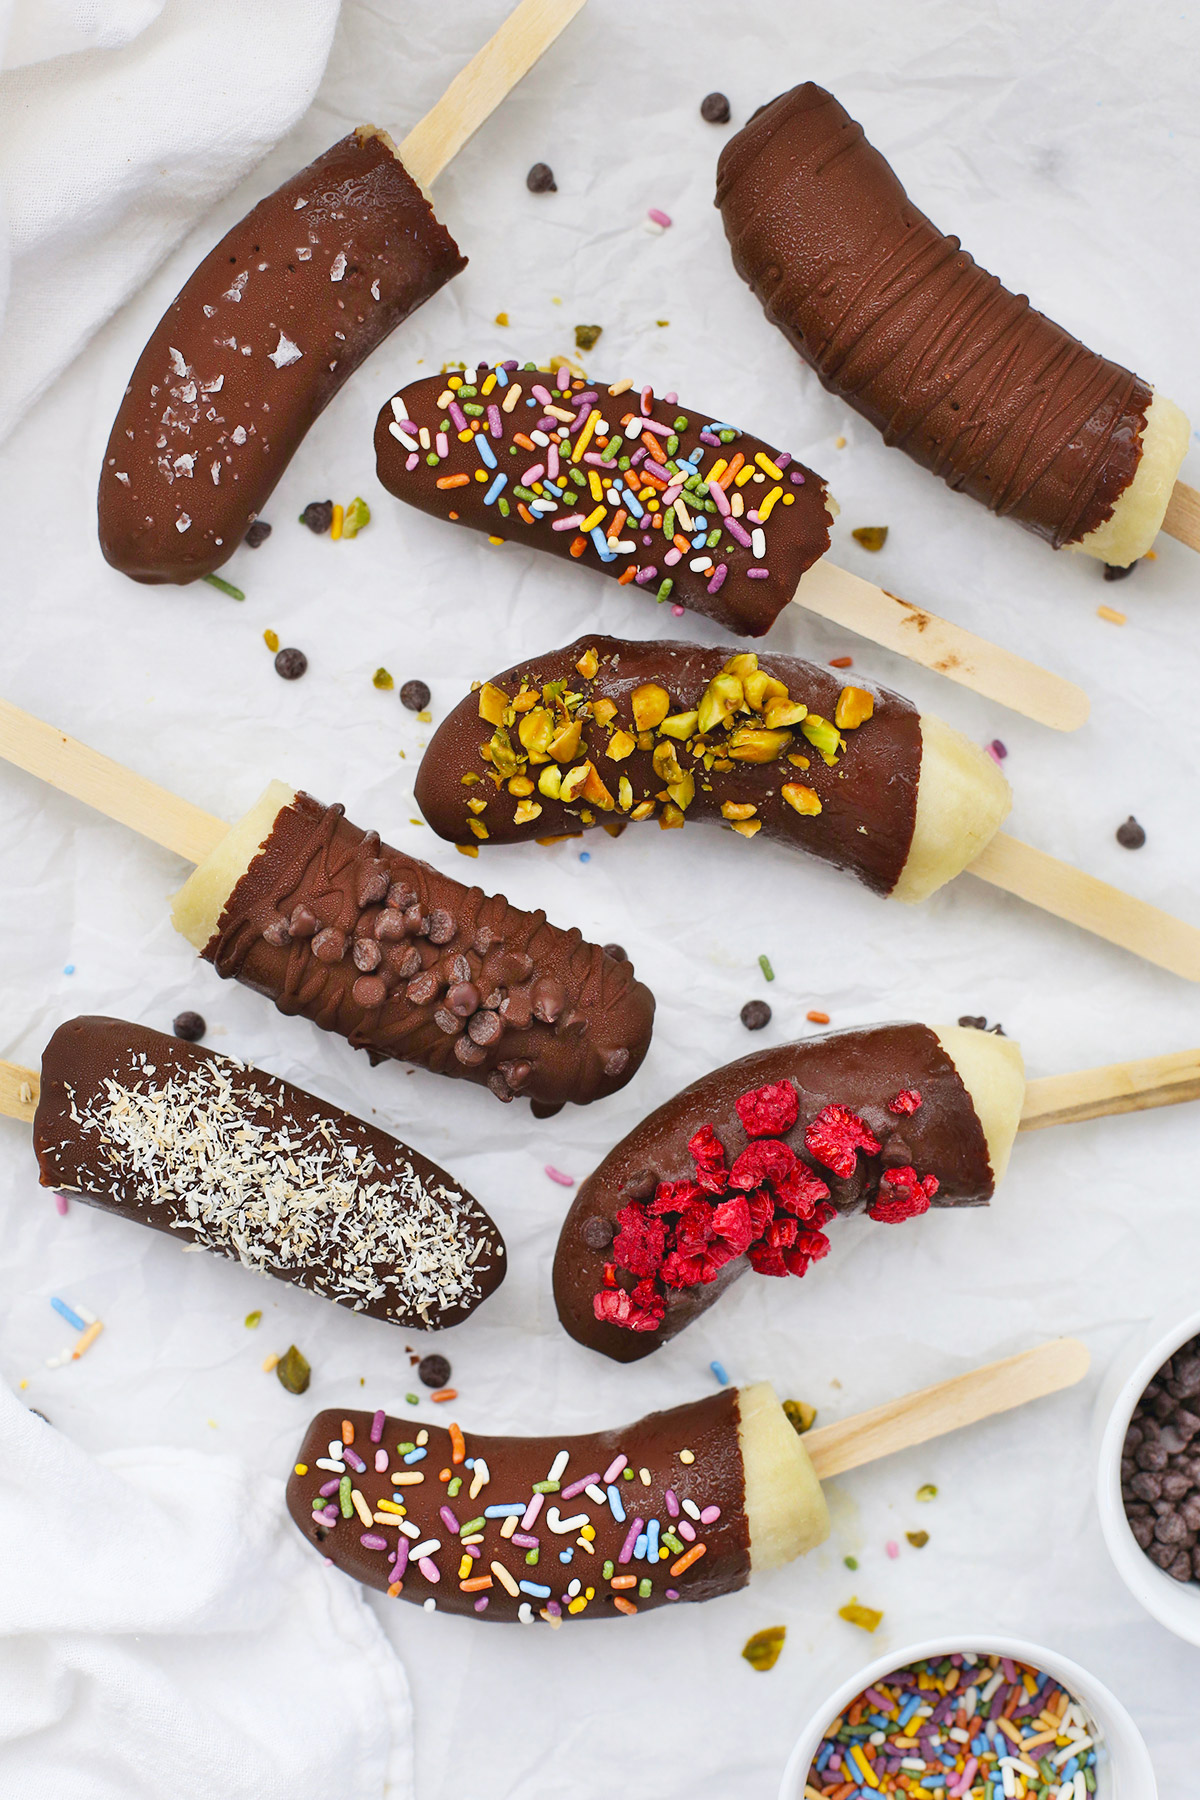 Frozen Chocolate Covered Bananas with different toppings scattered on a piece of parchment paper